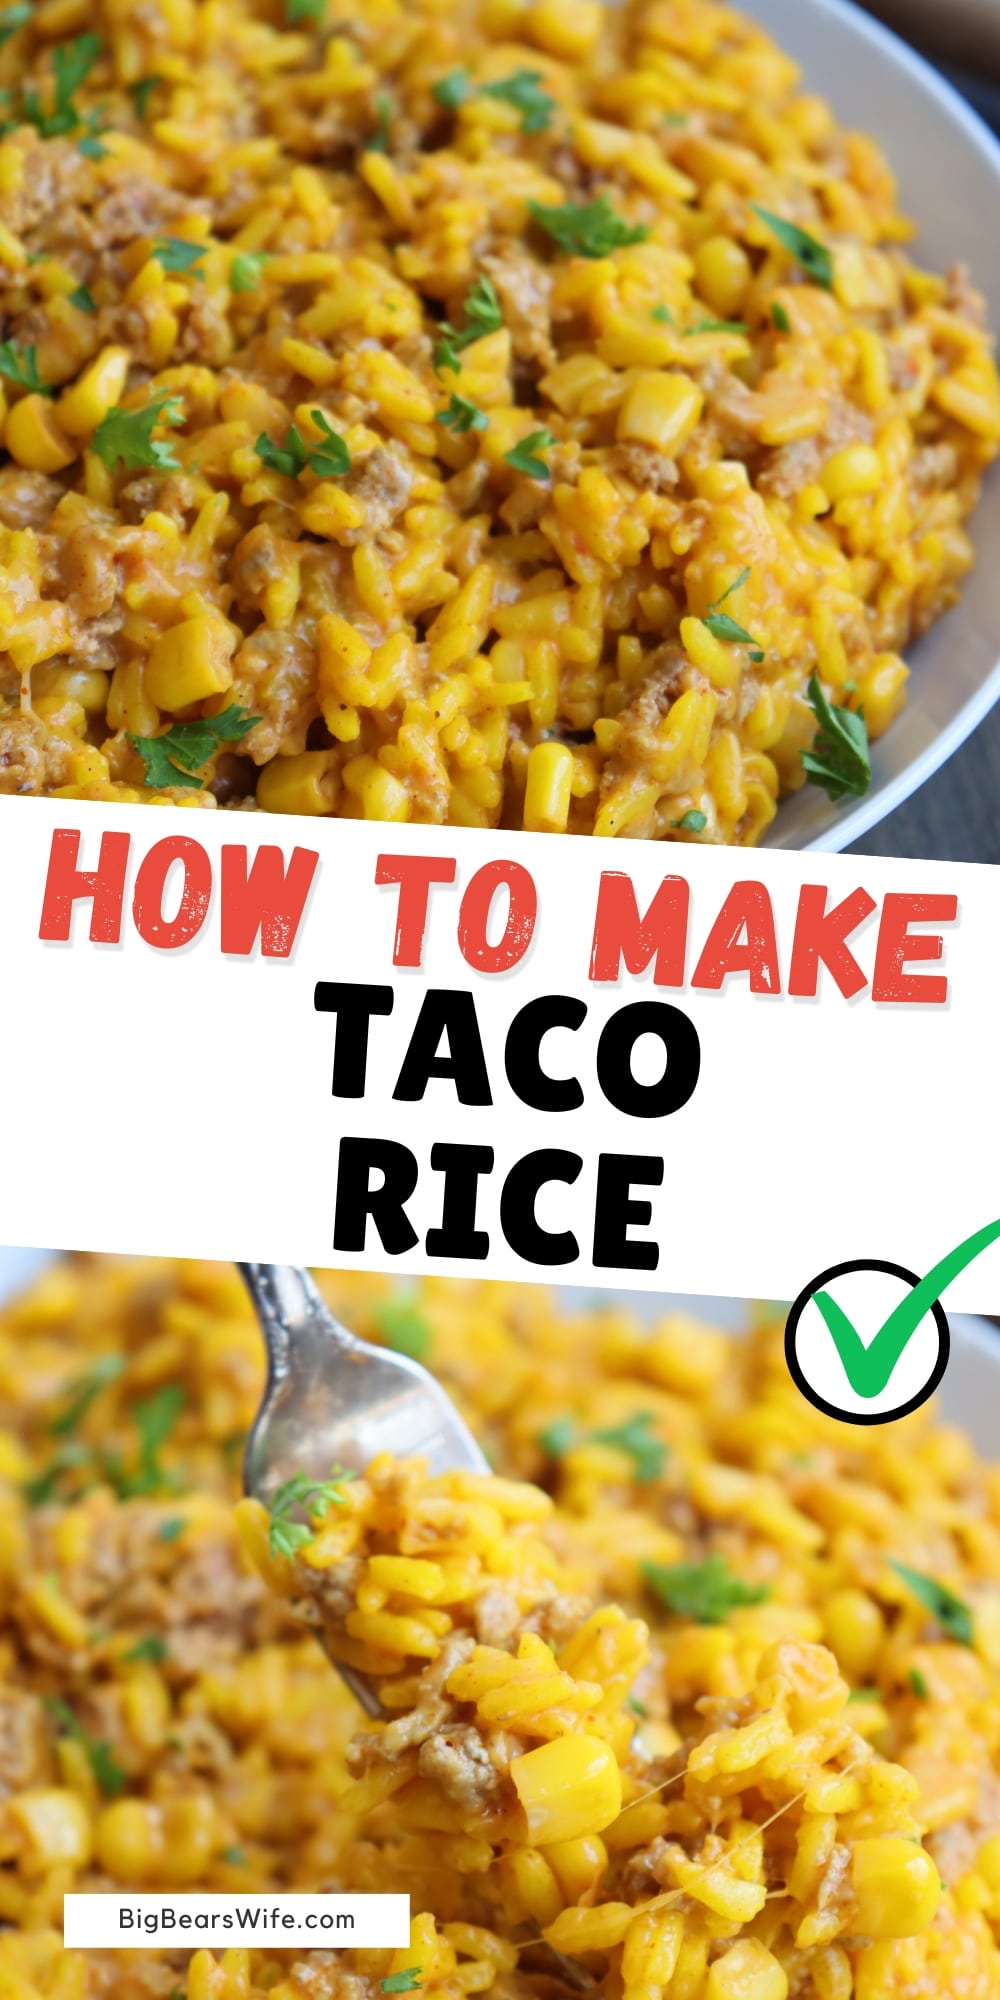 This Taco Rice is one of our favorite so to meals! Perfect on its own and great for stuffing tacos! Hard Taco Shells or Soft Tortillas, fill either for the perfect lunch or dinner!  via @bigbearswife